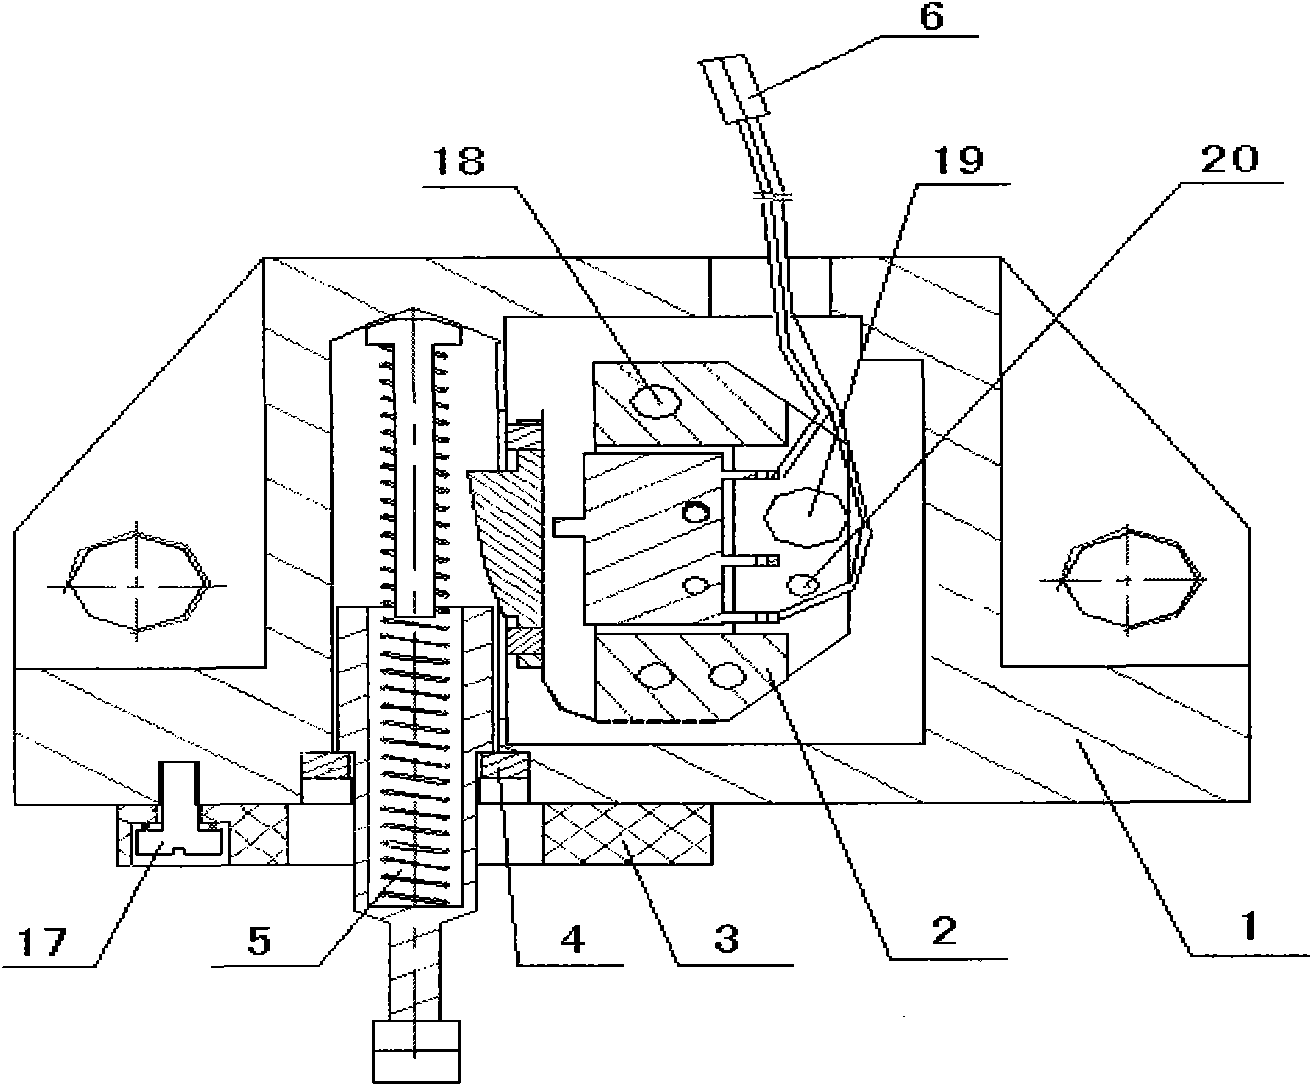 Travel limiting device